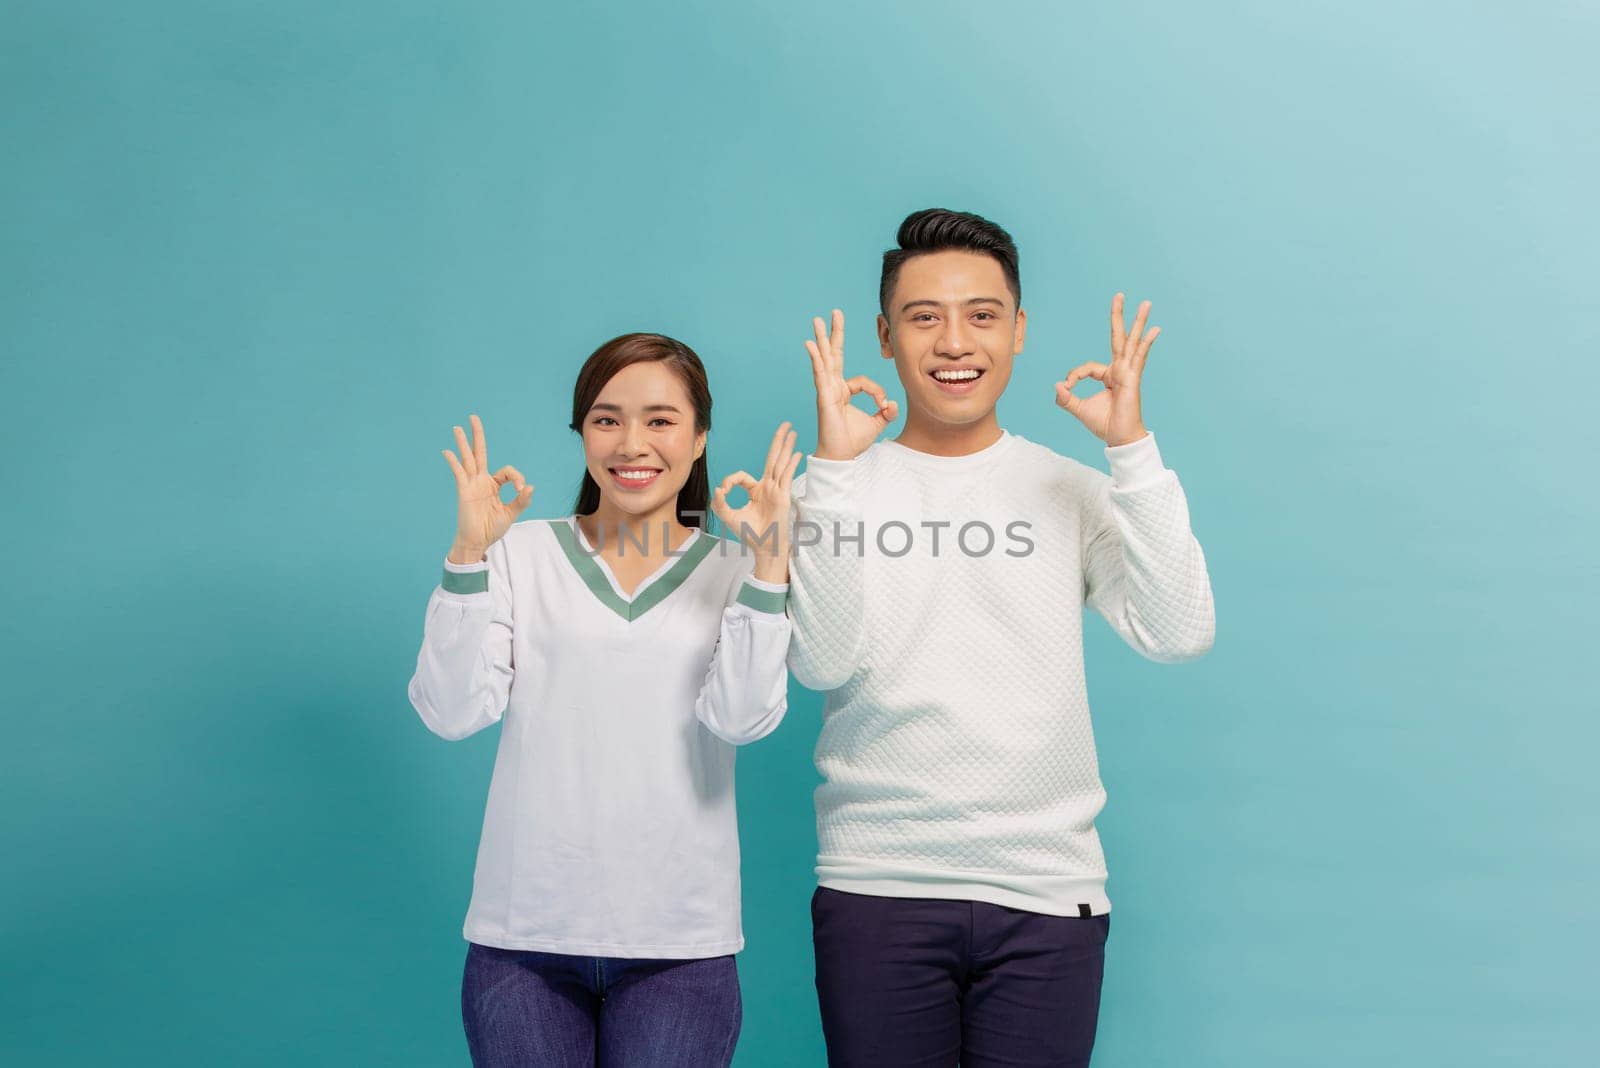 Funny couple guy and lady showing okey symbols expressing agreement emotional by makidotvn